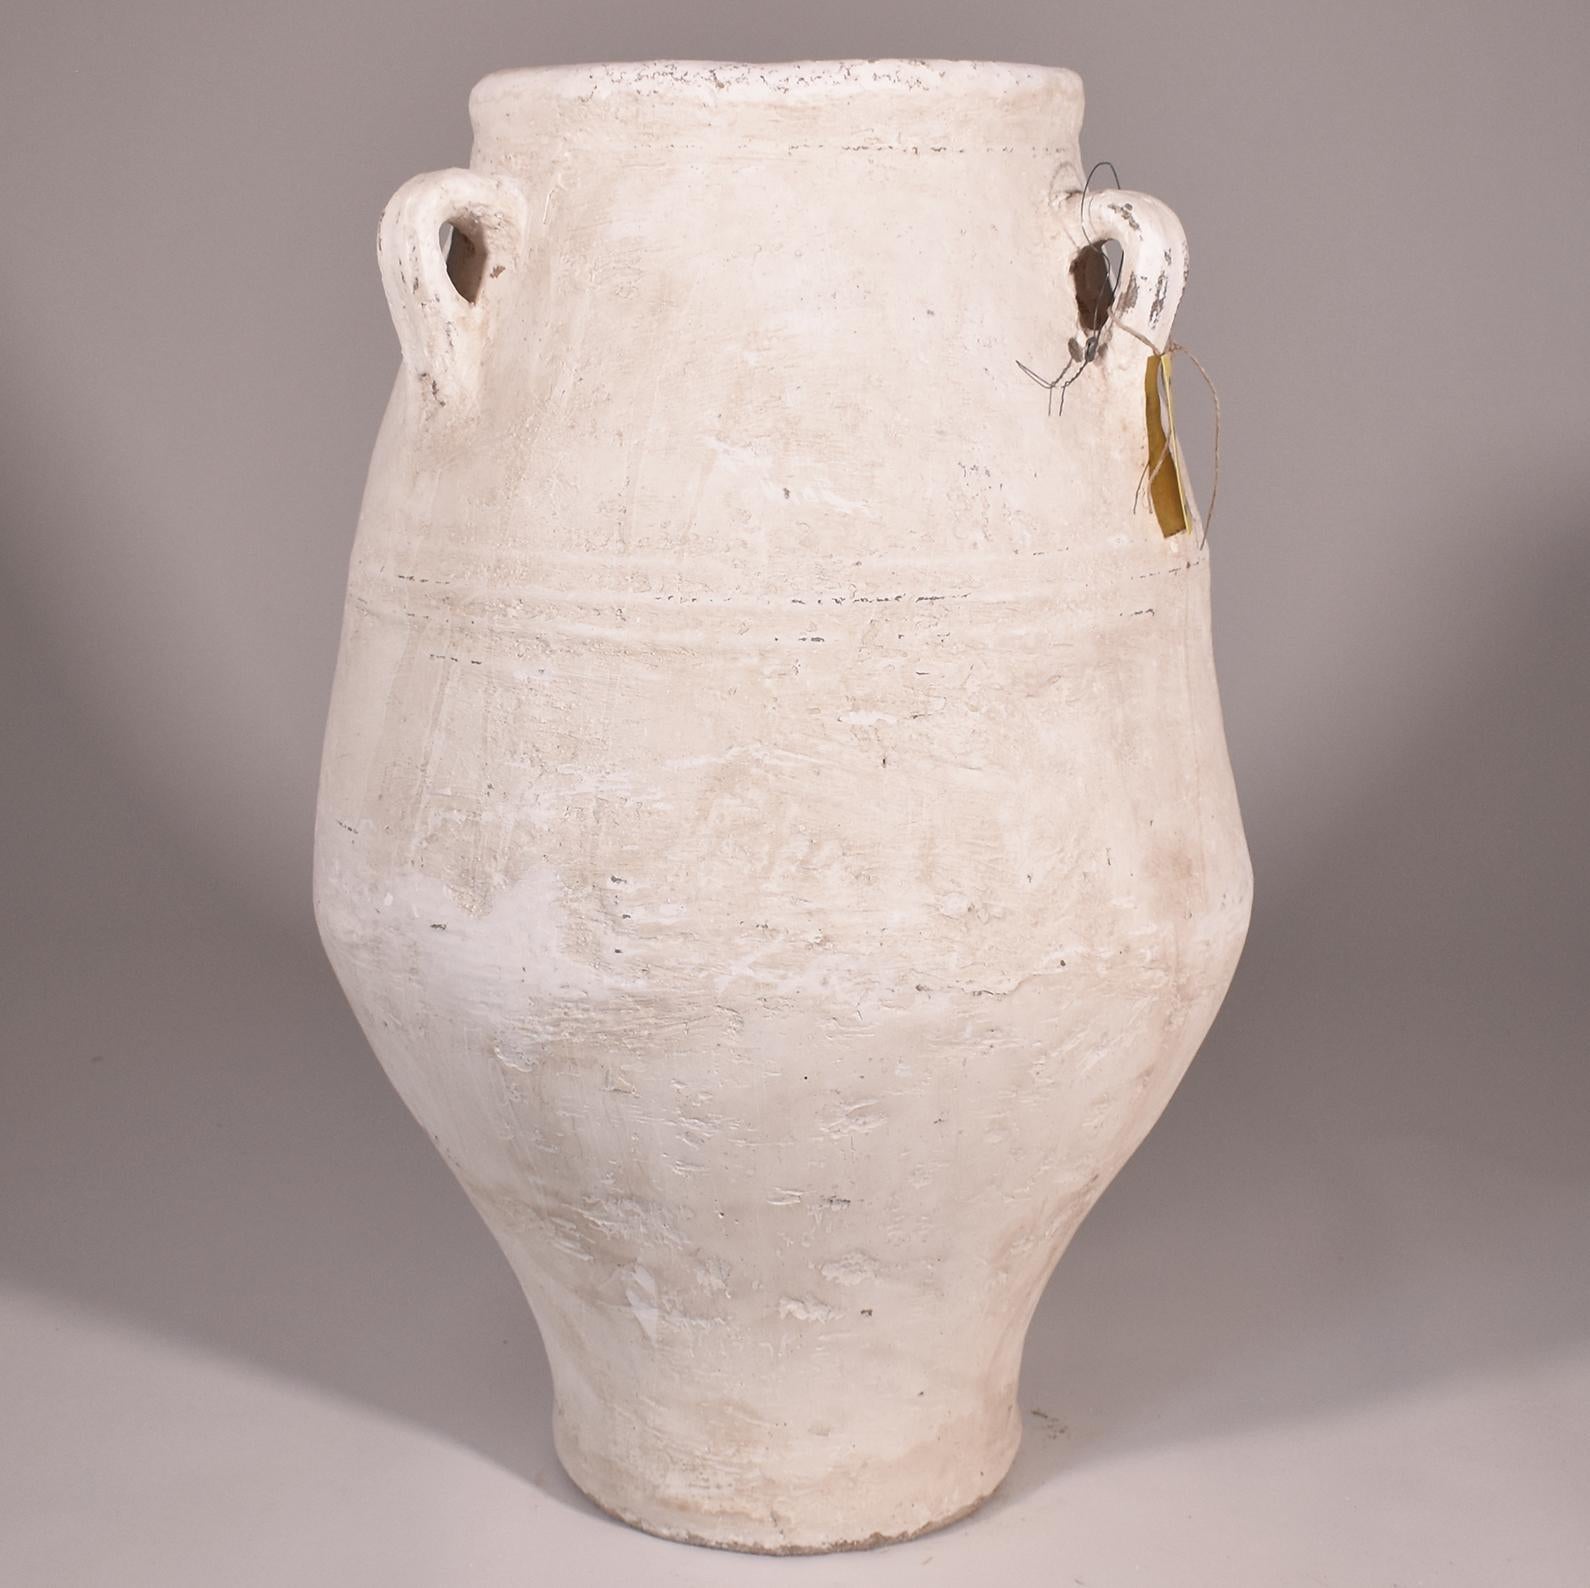 Large three-handled terracotta Jardiniere or Planter with white finish and gentle shape. I find these scattered across the elegant exteriors of homes in Southern France and Italy and use them in my own yard in New Orleans. The graceful Silhouette